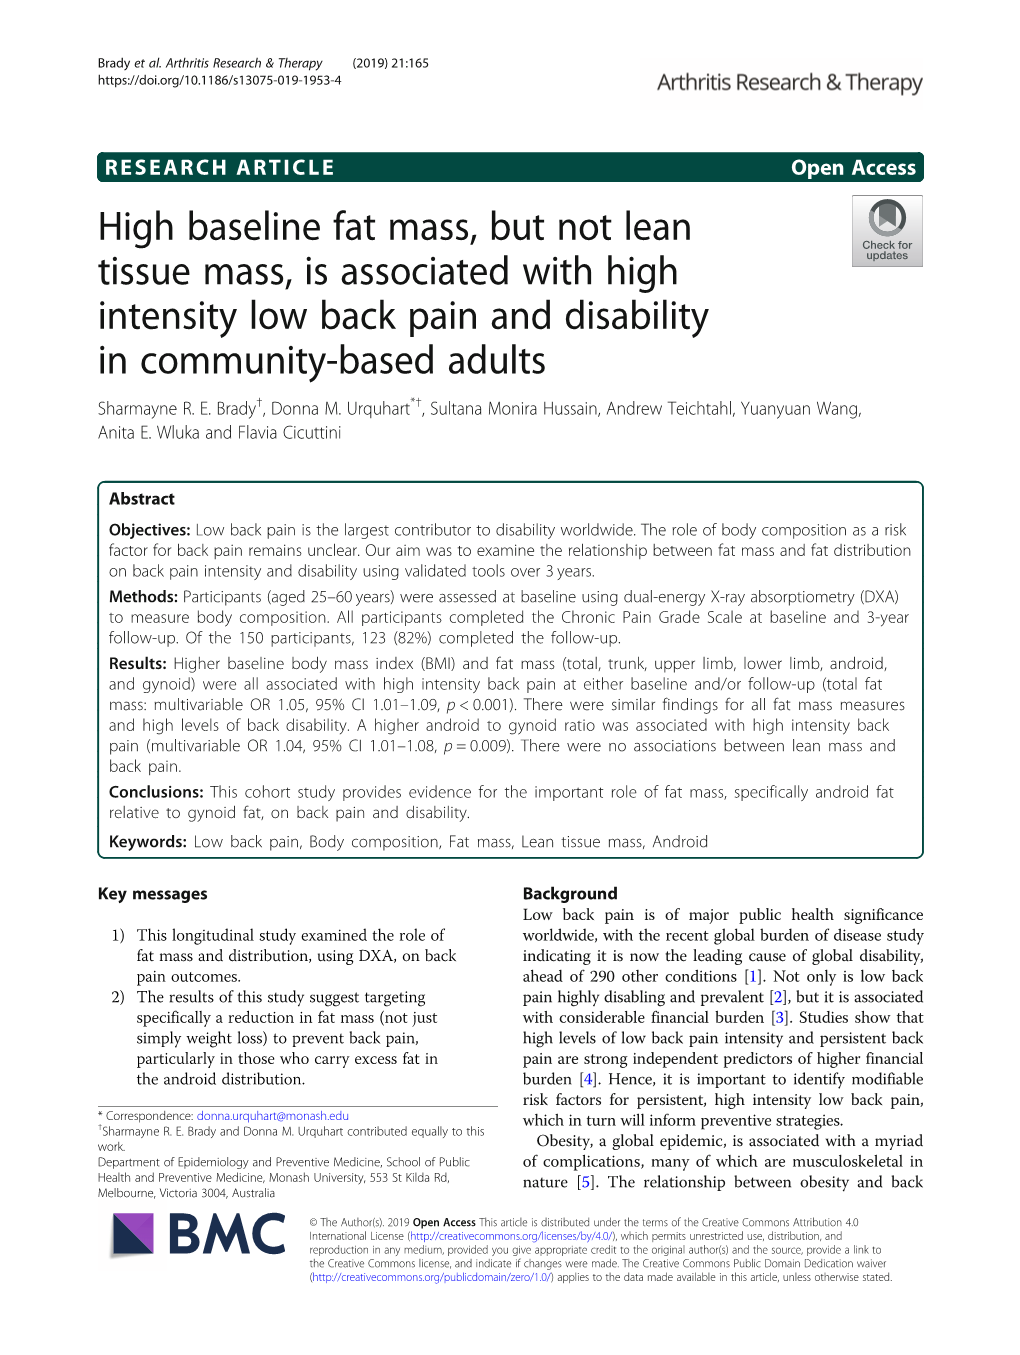 High Baseline Fat Mass, but Not Lean Tissue Mass, Is Associated with High Intensity Low Back Pain and Disability in Community-Based Adults Sharmayne R